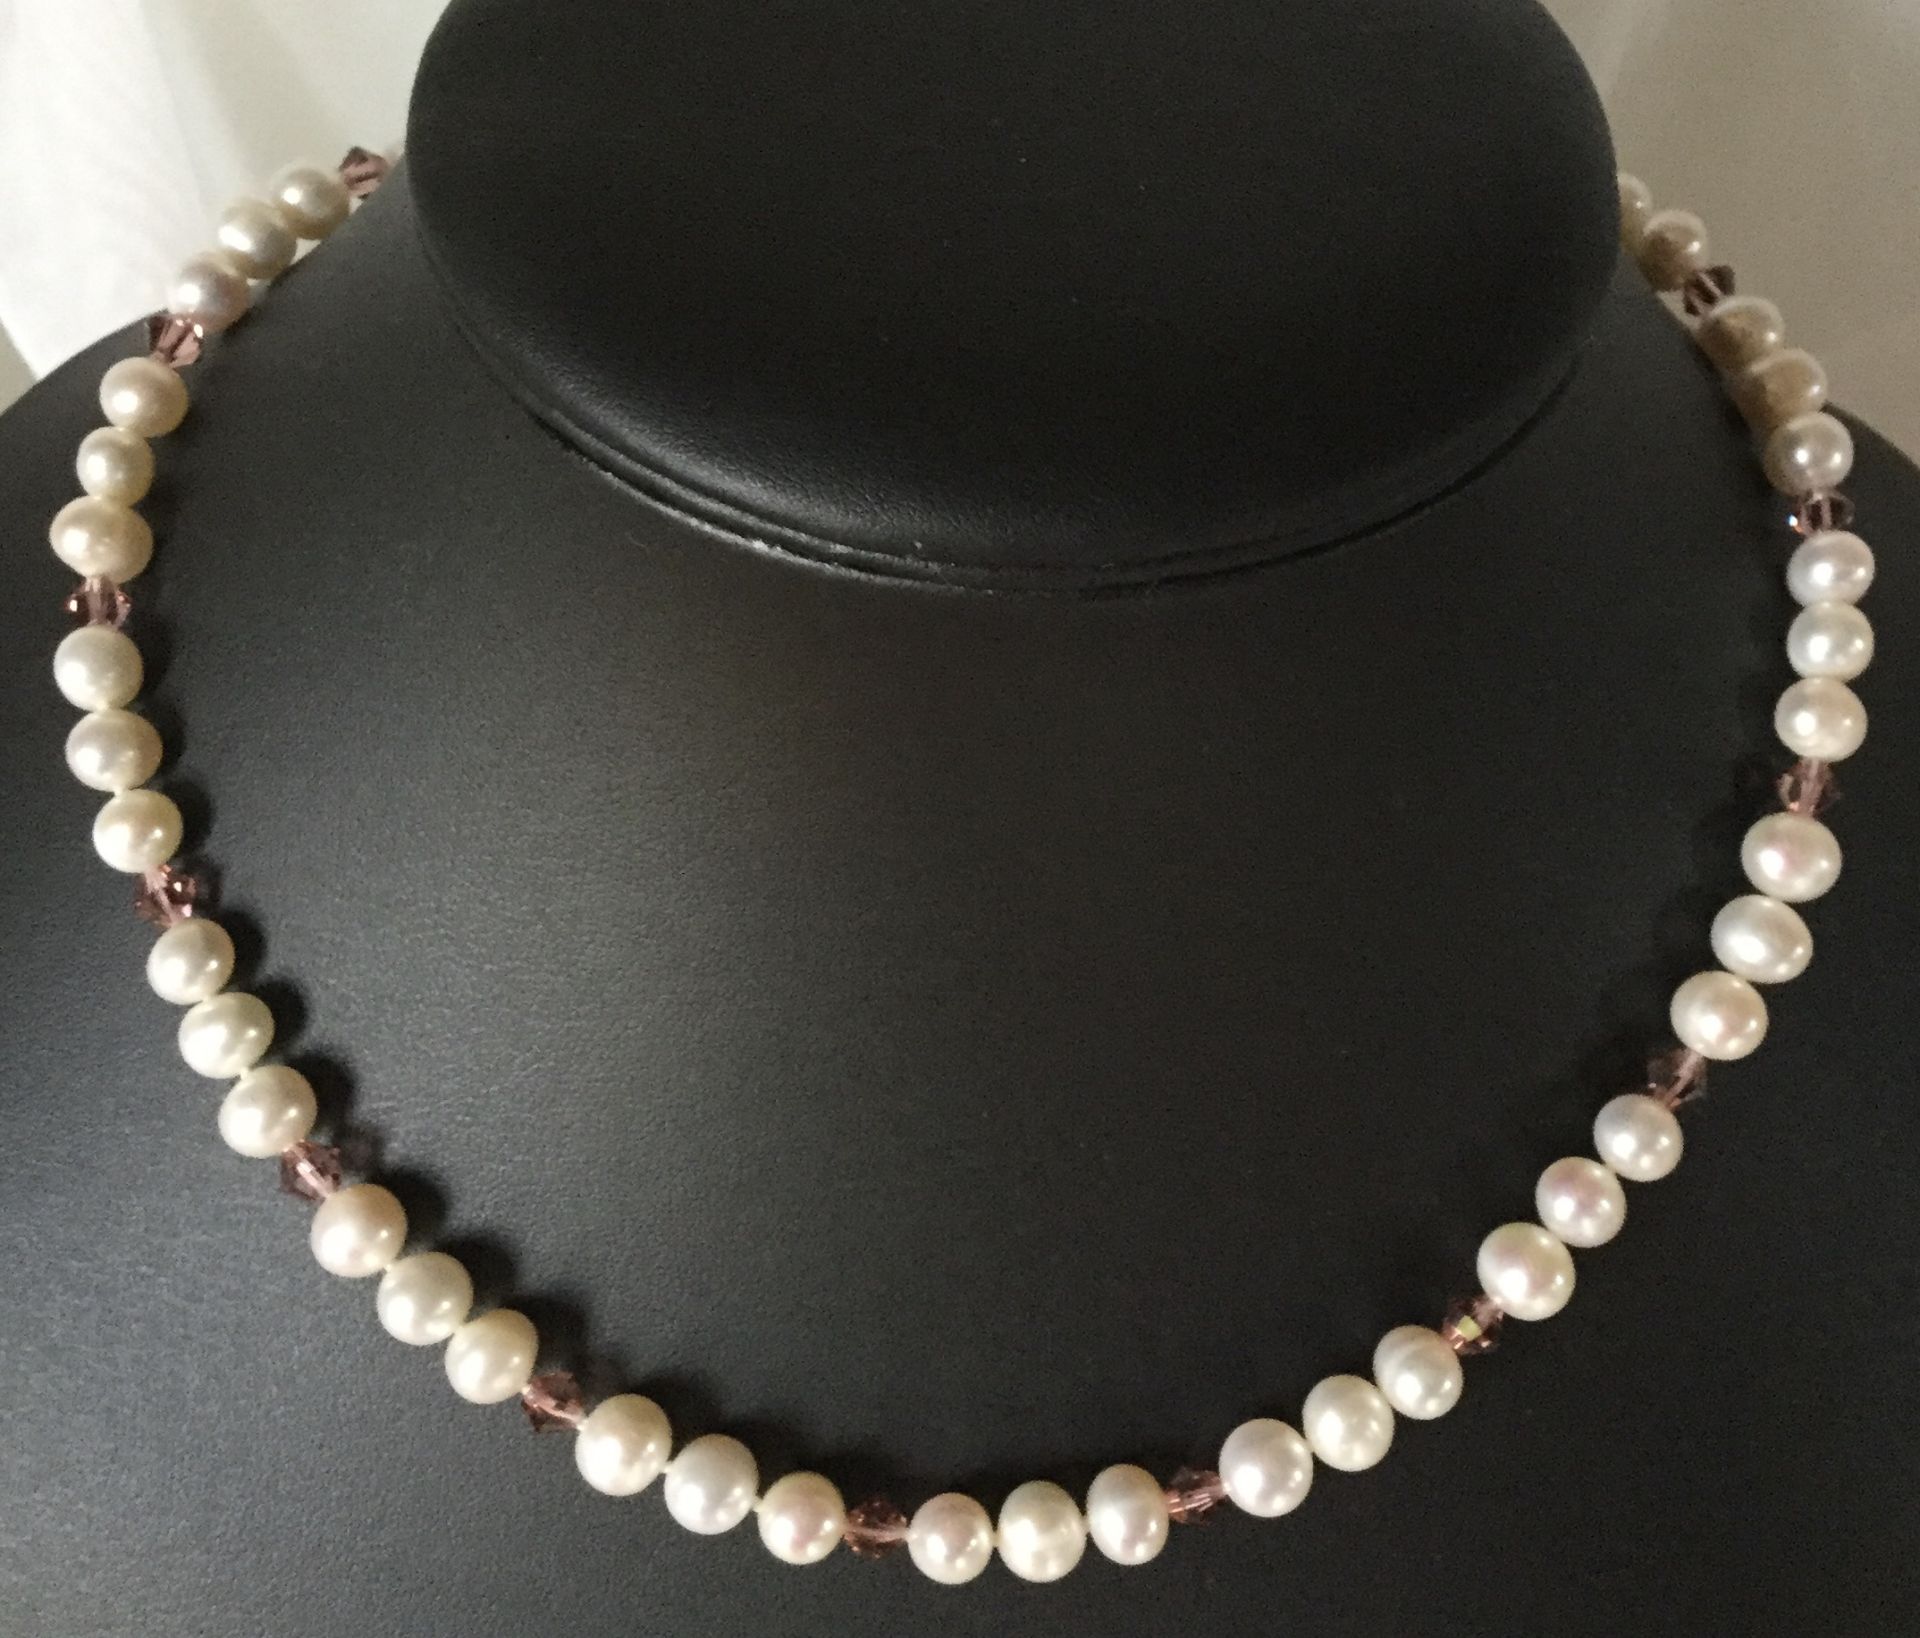 Freshwater Cultured Pearl with Vintage Rose Swarovski éléments necklace 925 silver clasp - Image 3 of 8